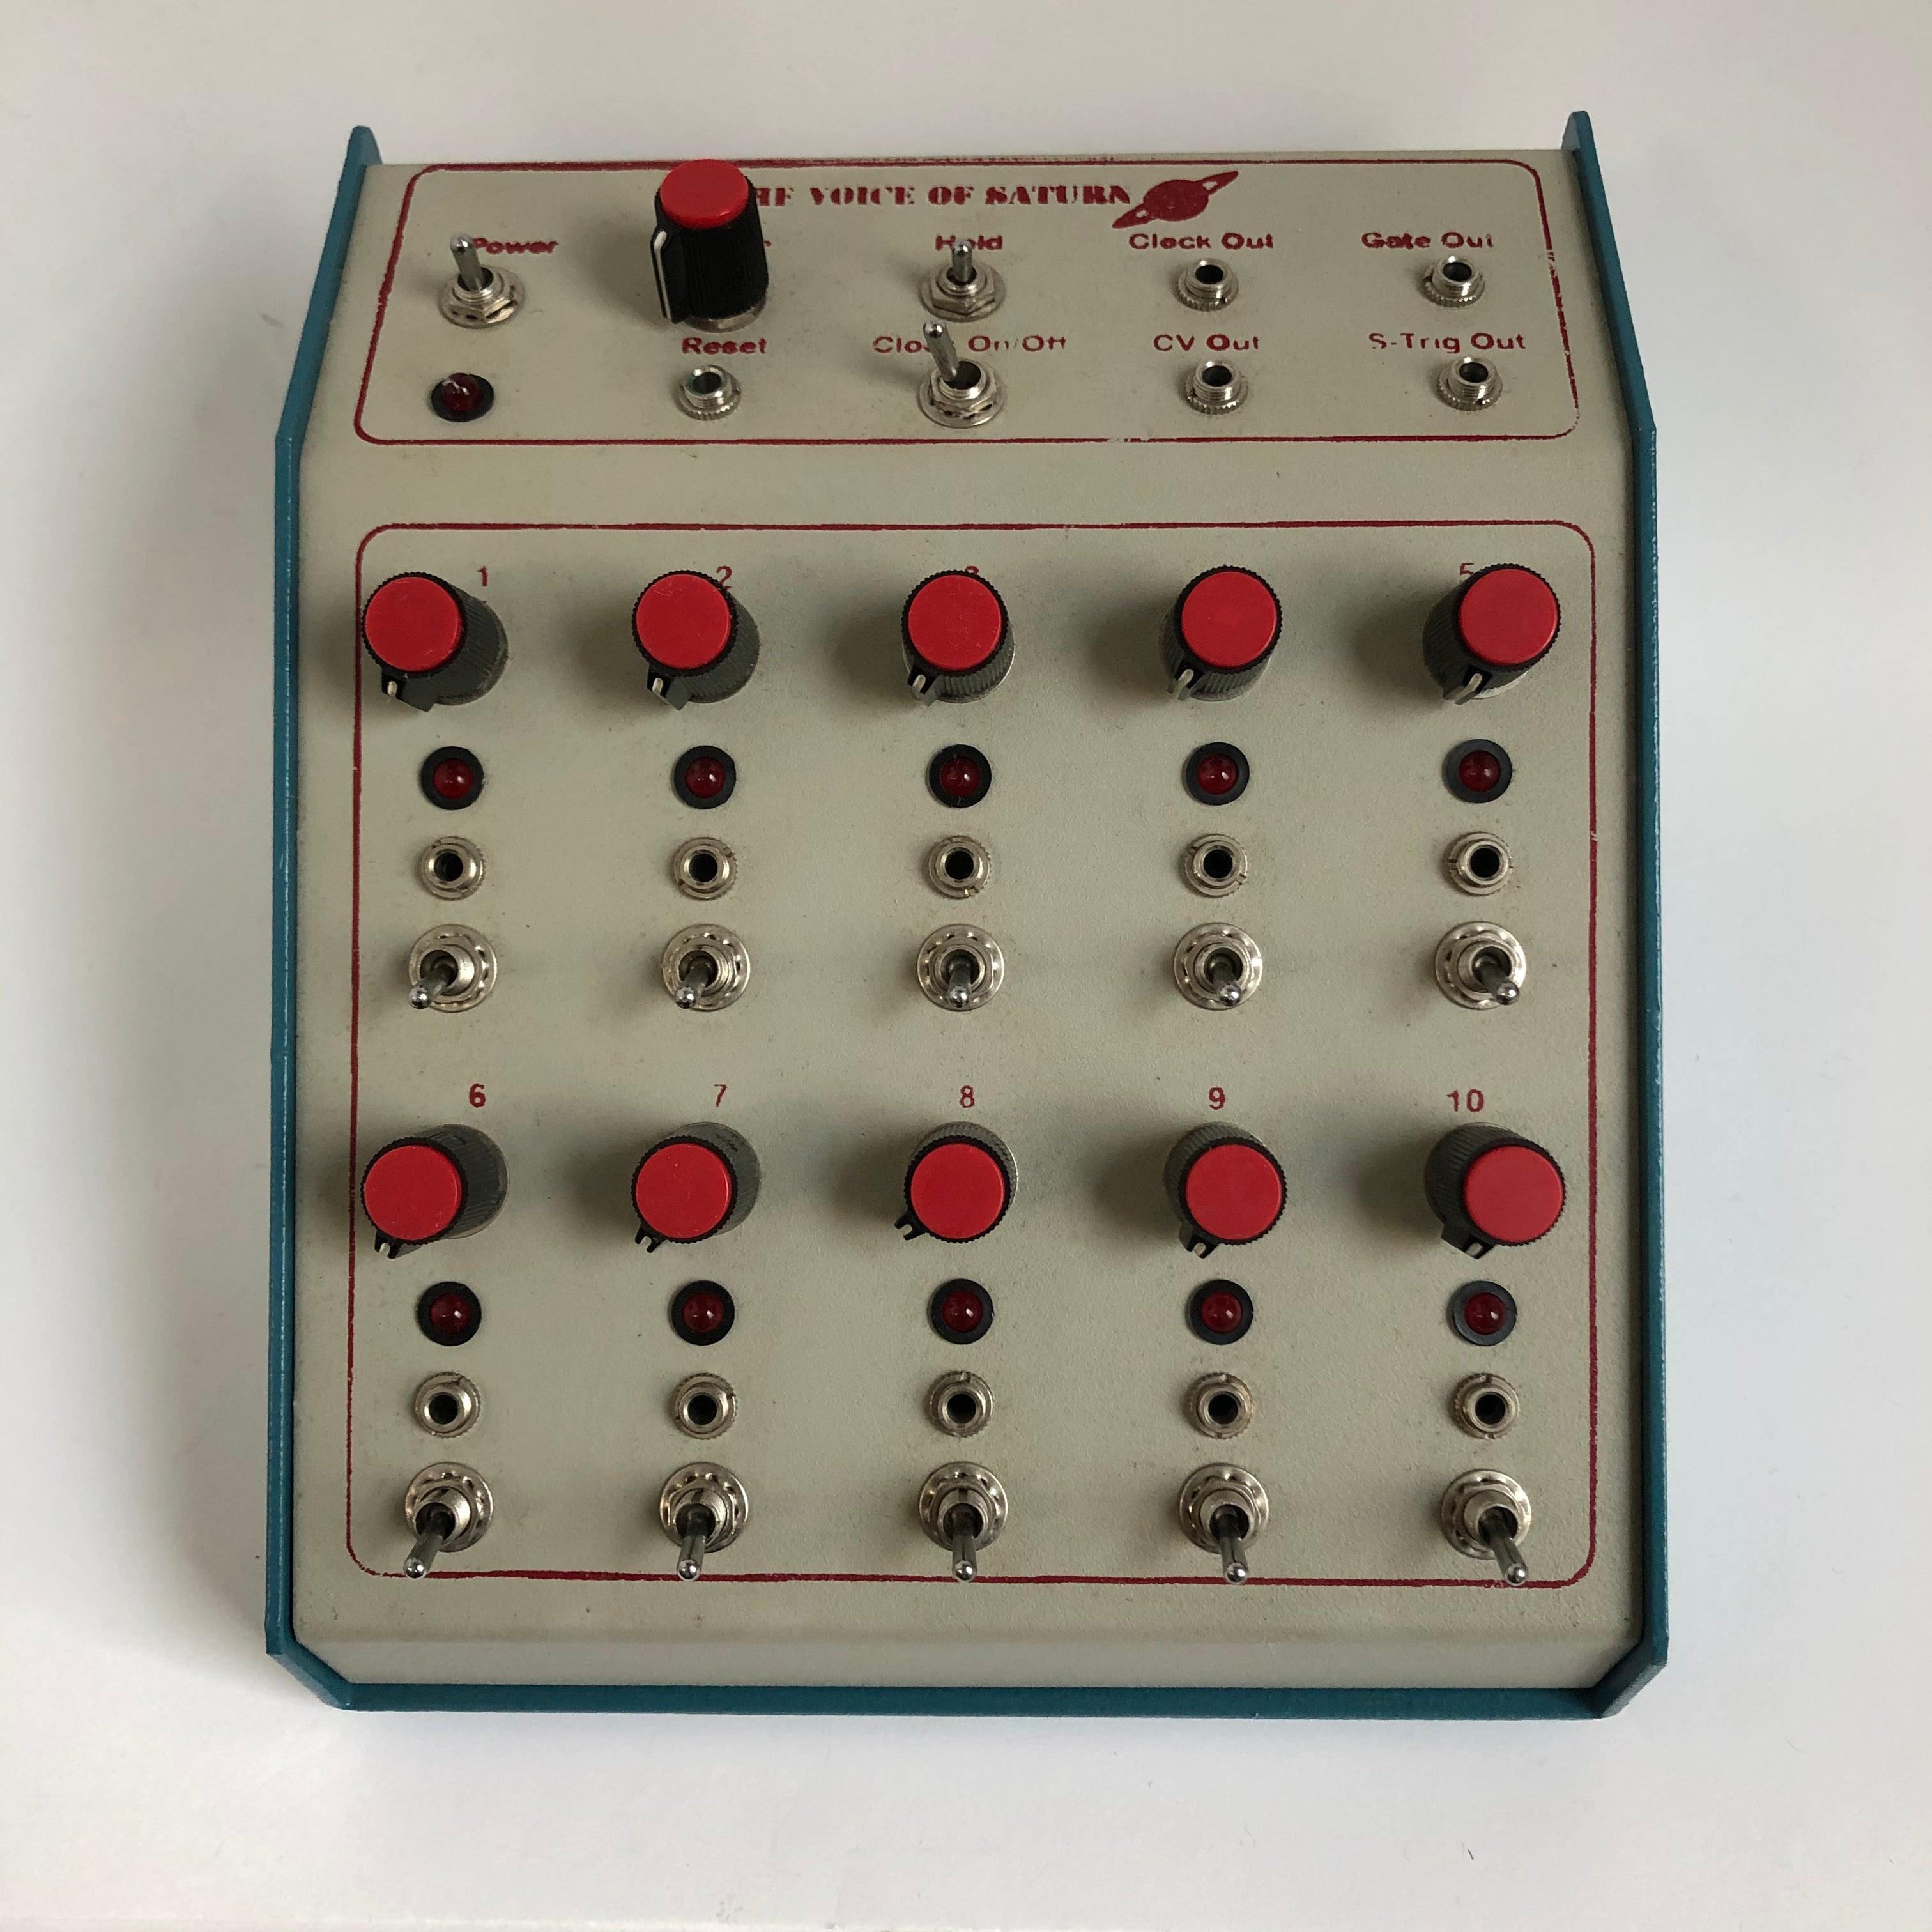 Voice of Saturn 10 Step Sequencer